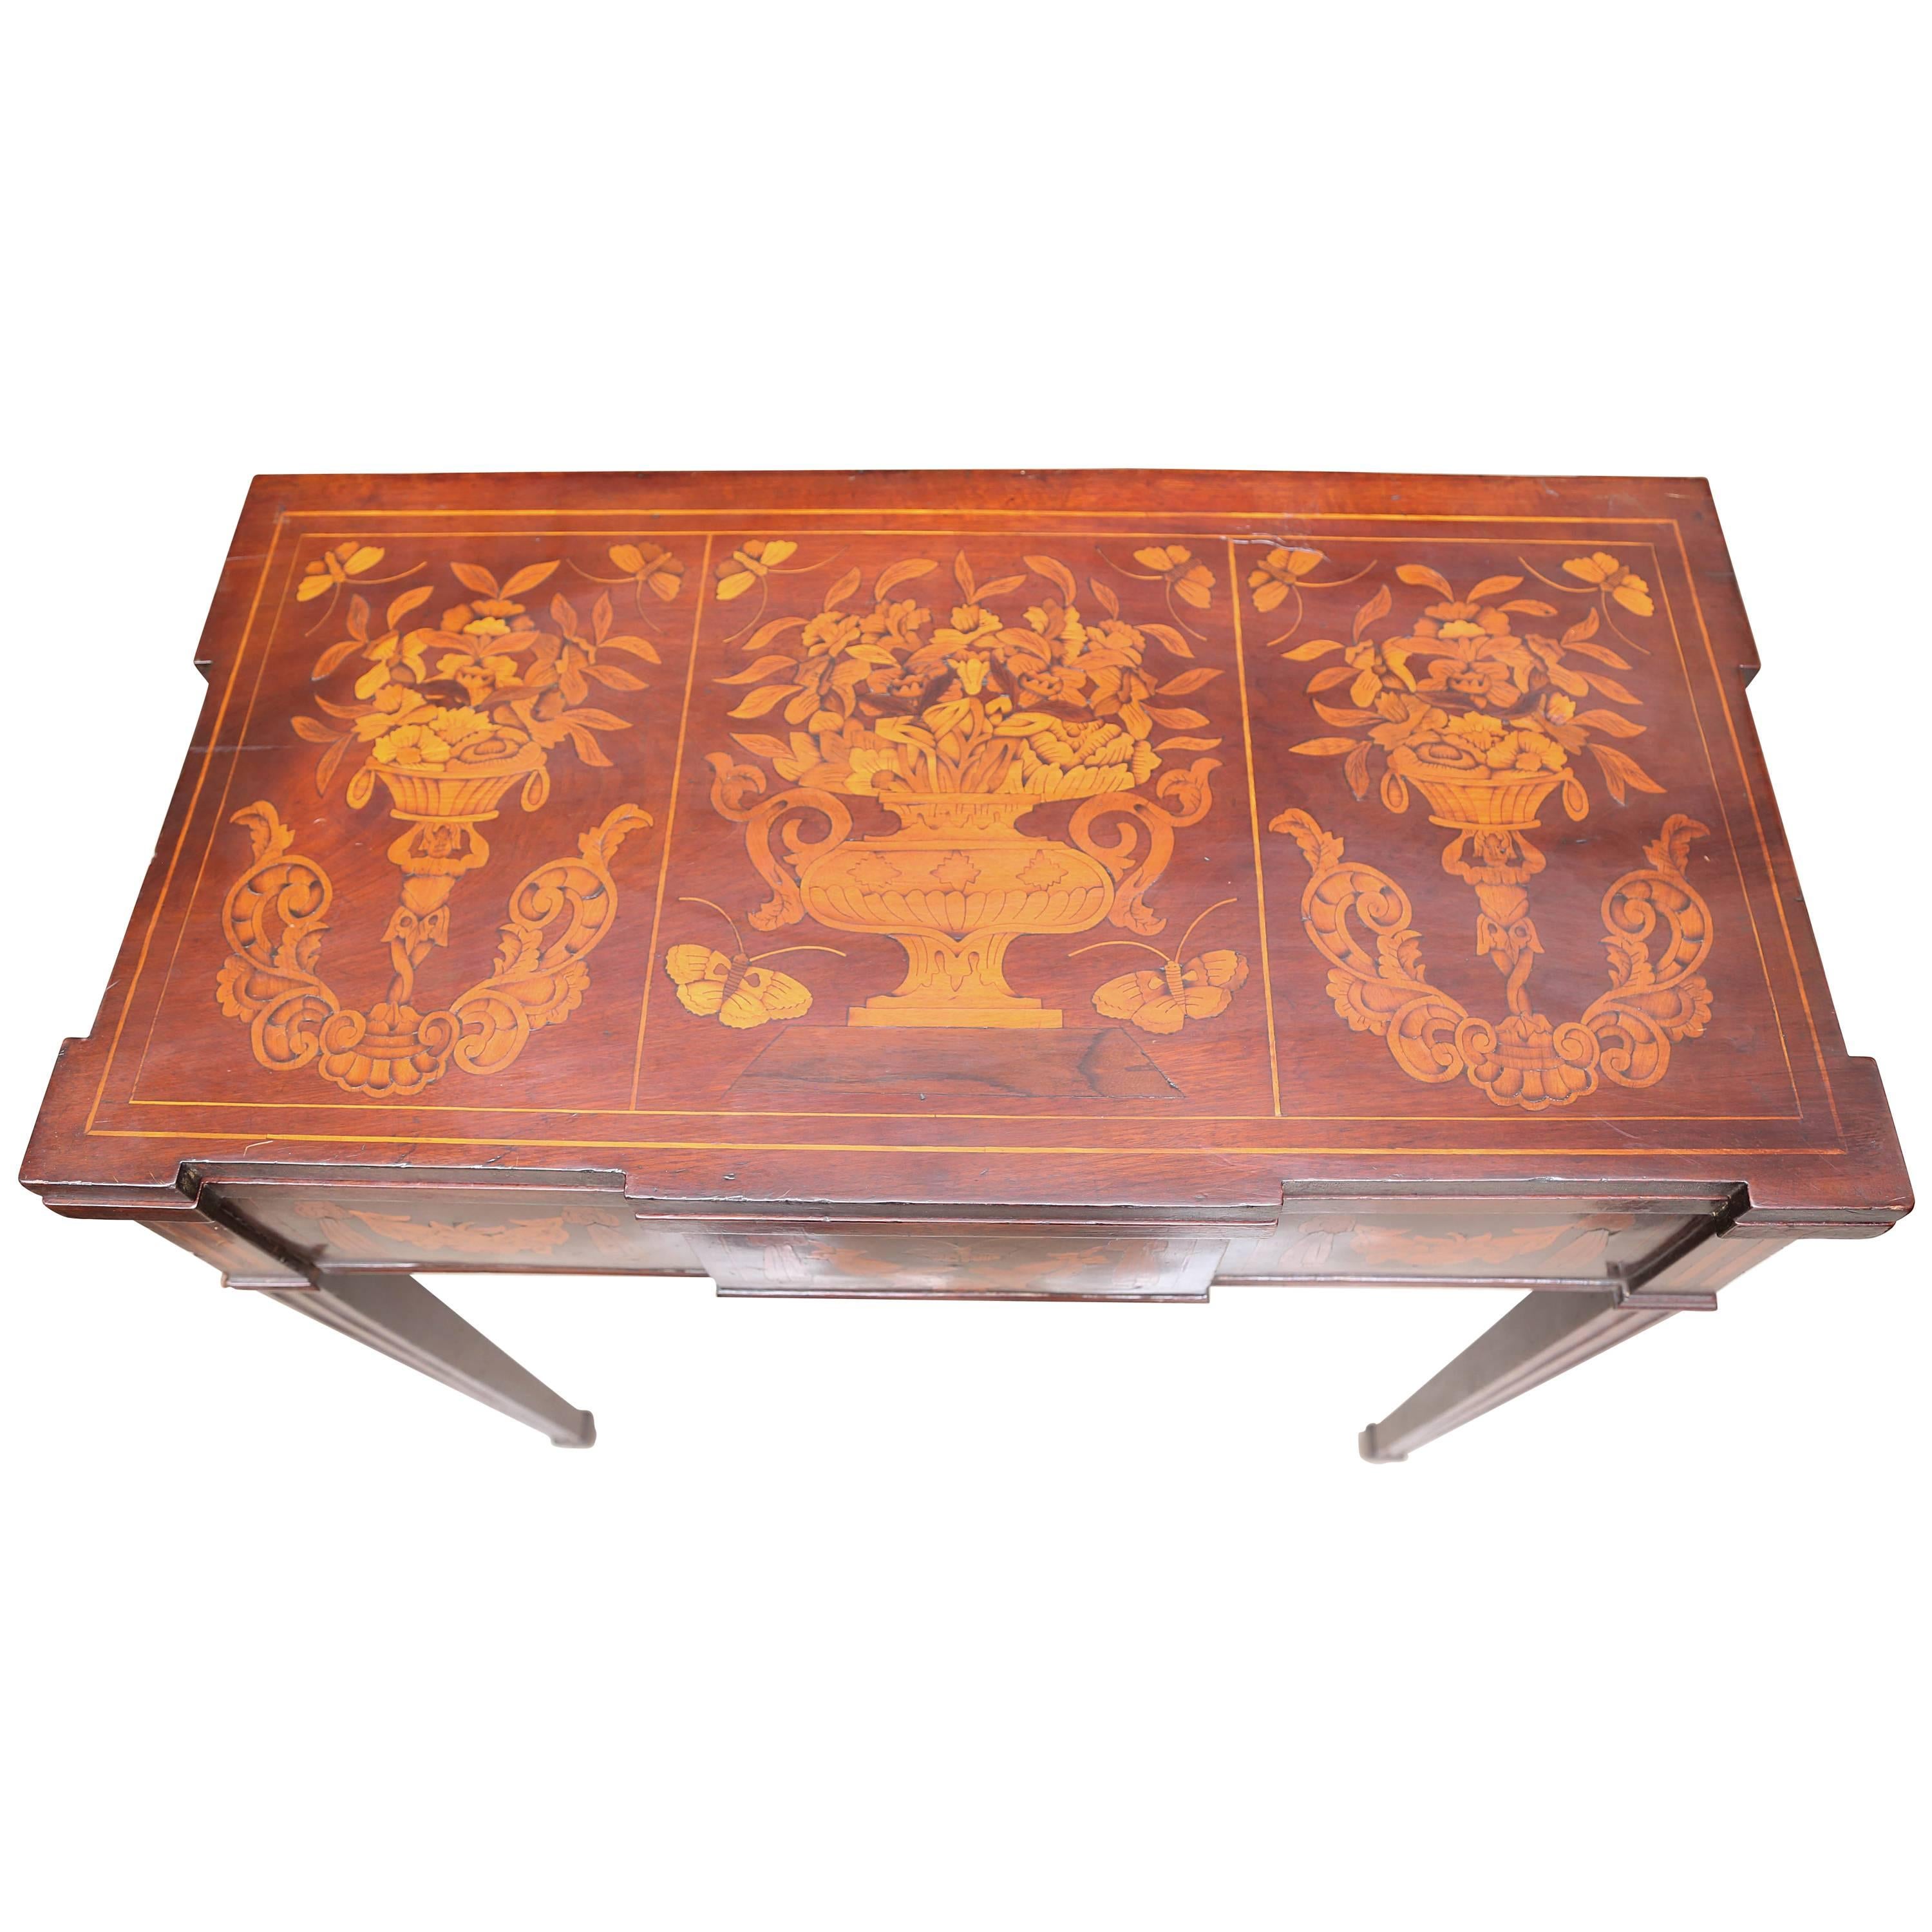 Superb 19th Century Dutch Marquetry Flip-Top Game Table